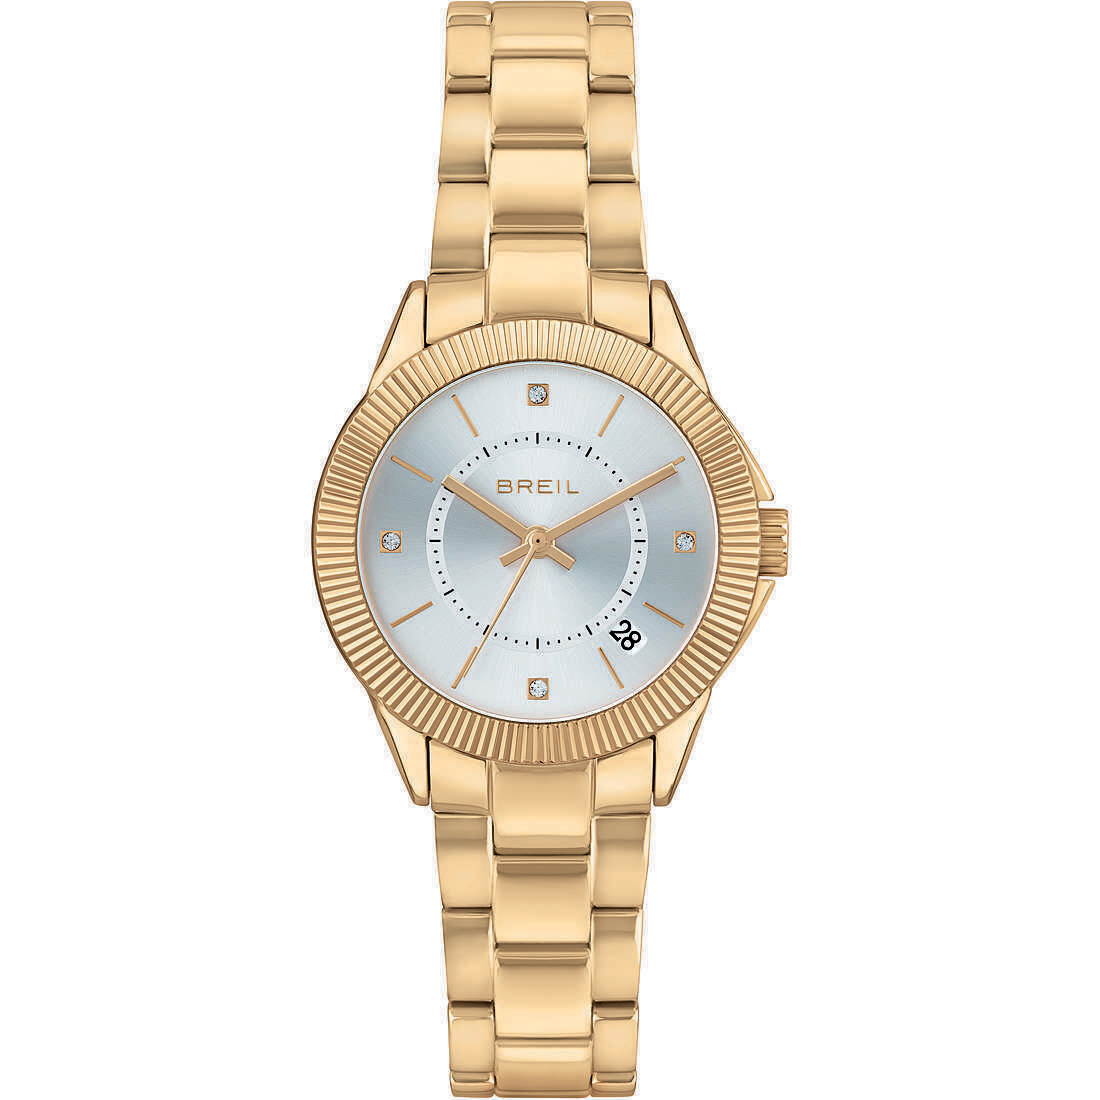 SHIMMERY SOLO TEMPO LADY 31 MM - BREIL - TW1940